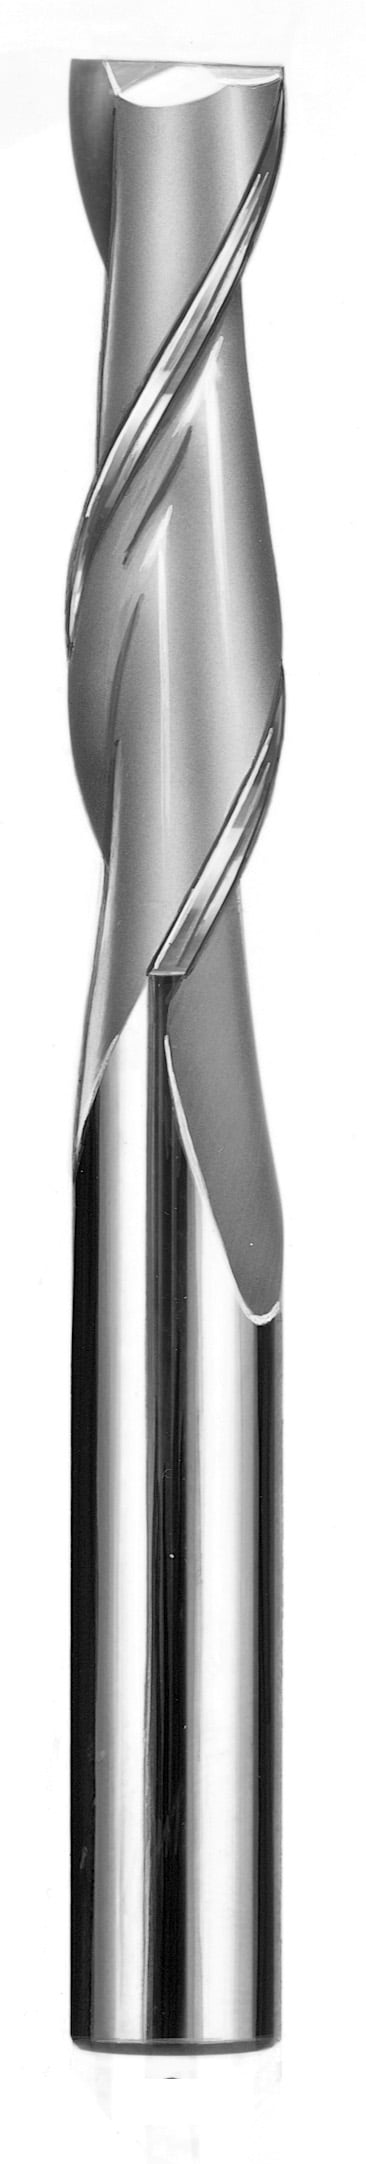 3/4" Dia, 2 Flute, Square End End Mill - 33315